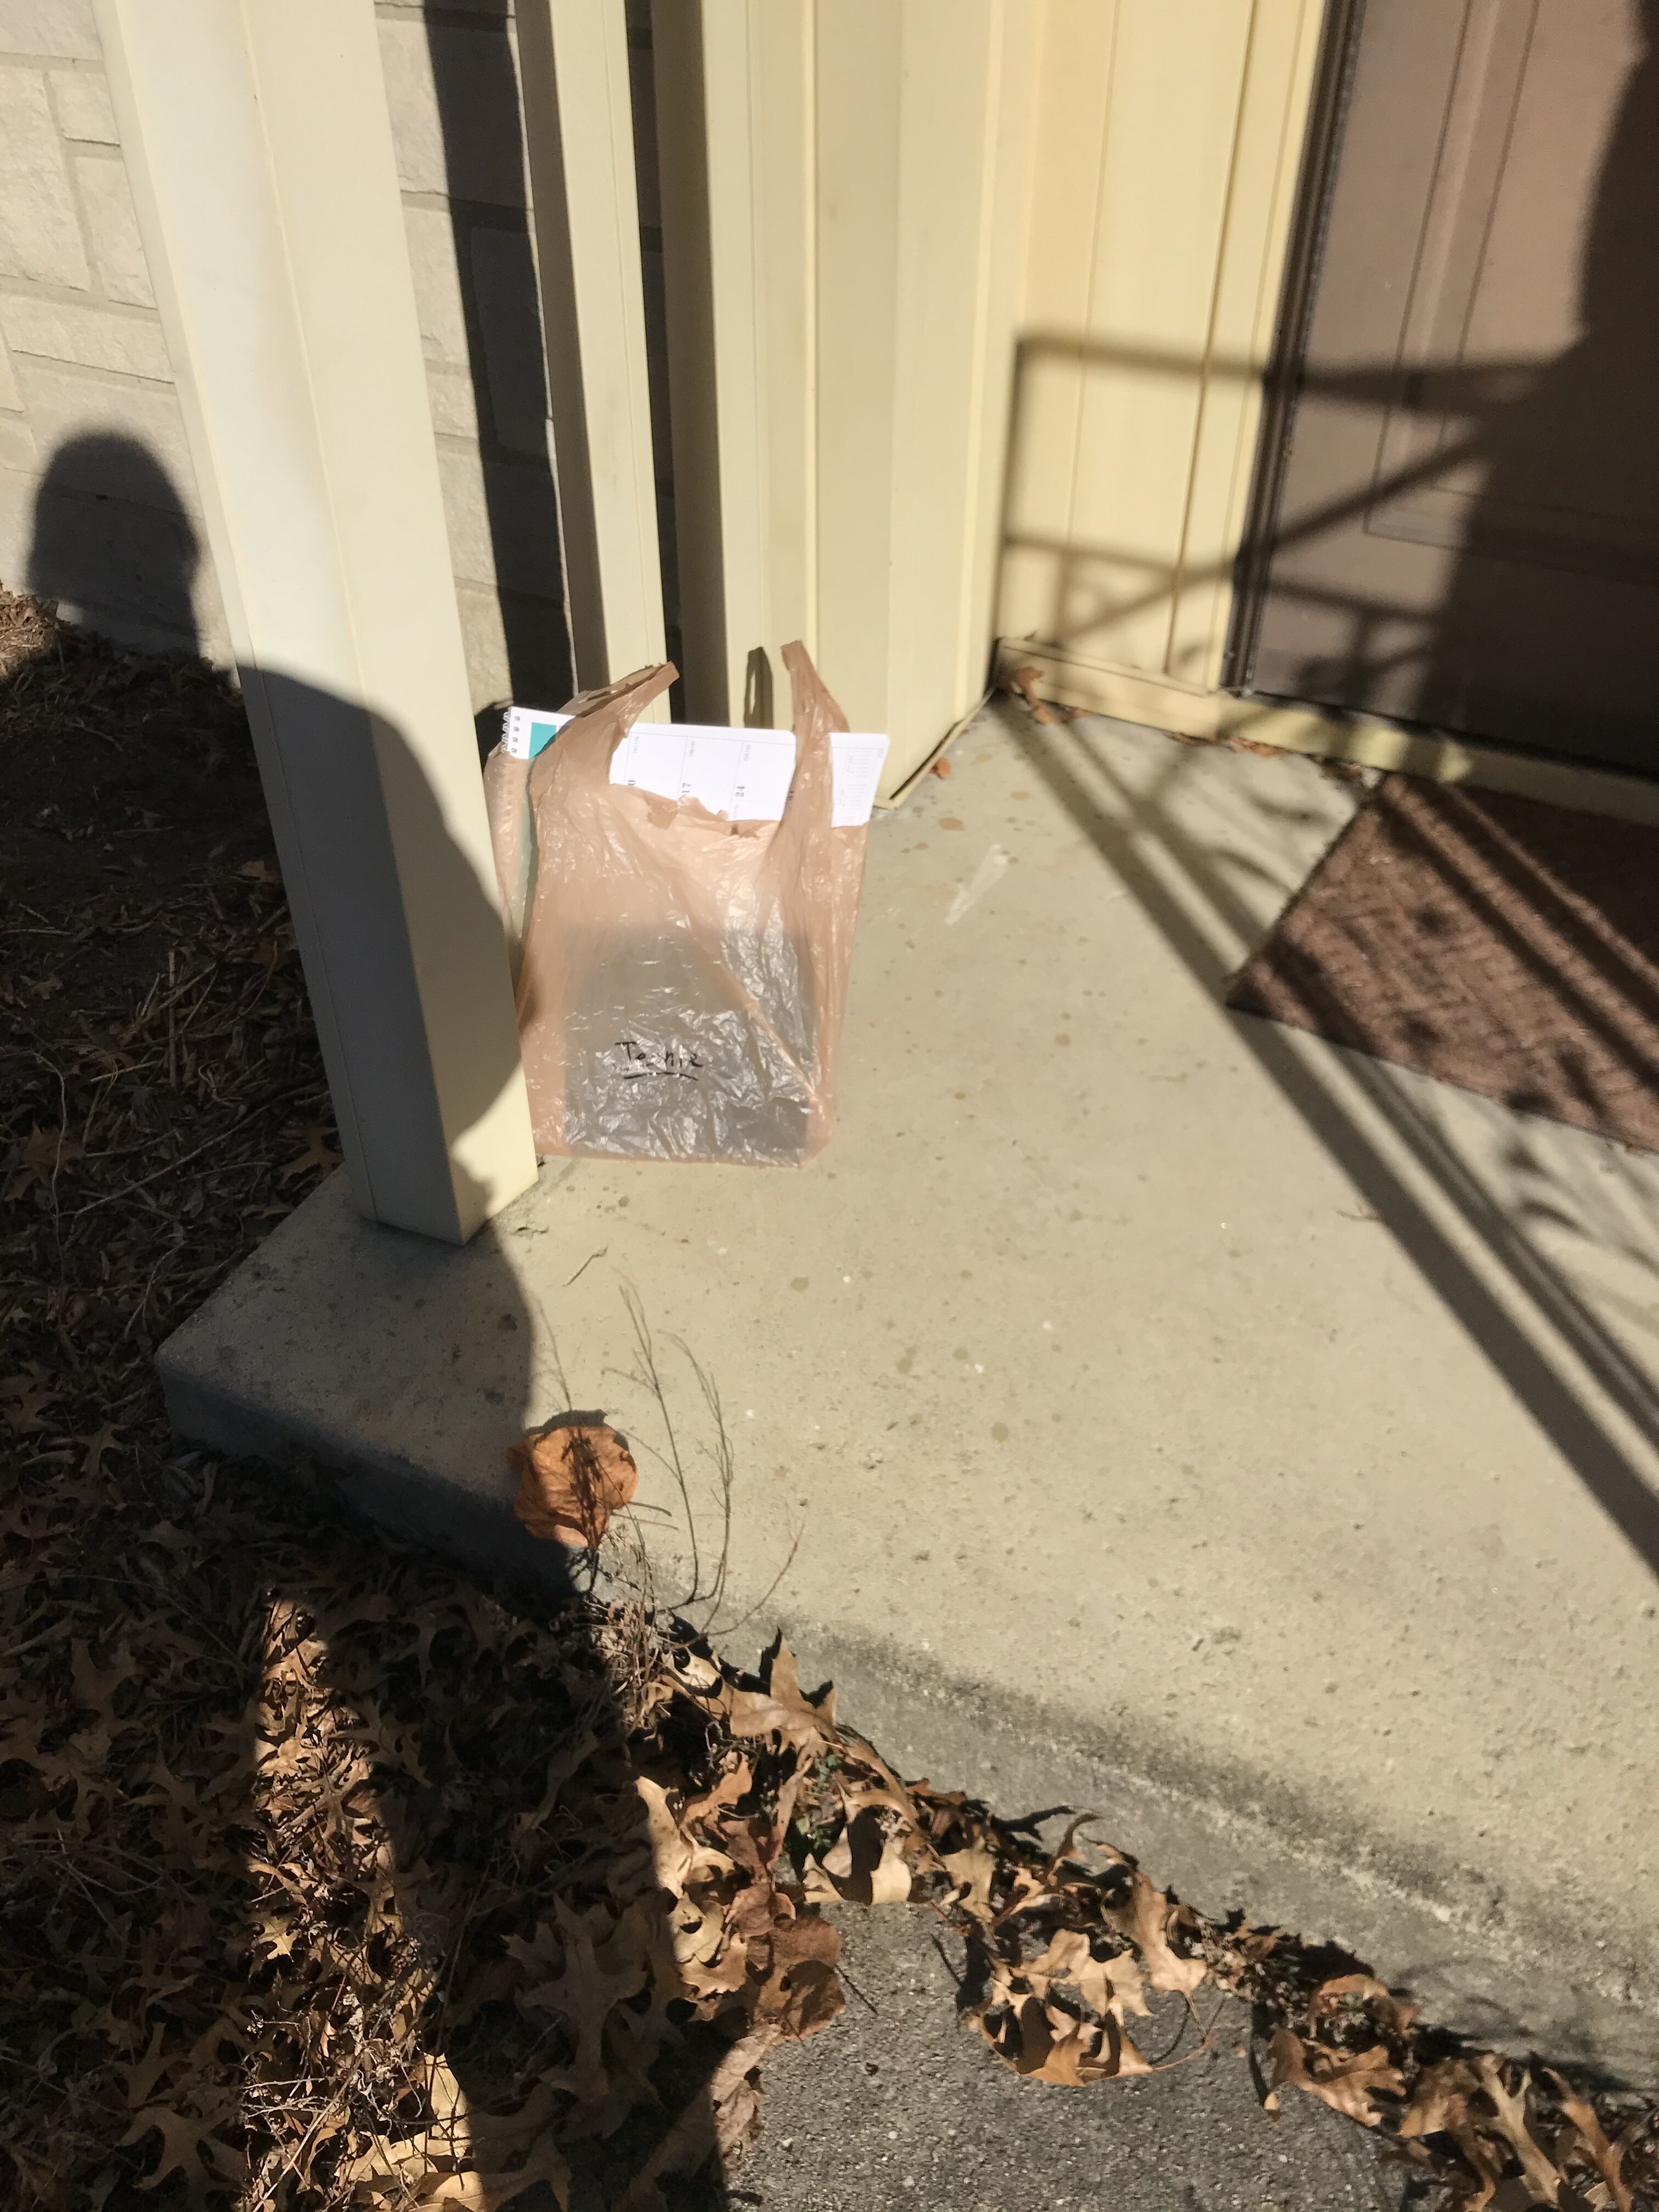 Porch pickups are common ways to exchange goods in Buy Nothing groups.